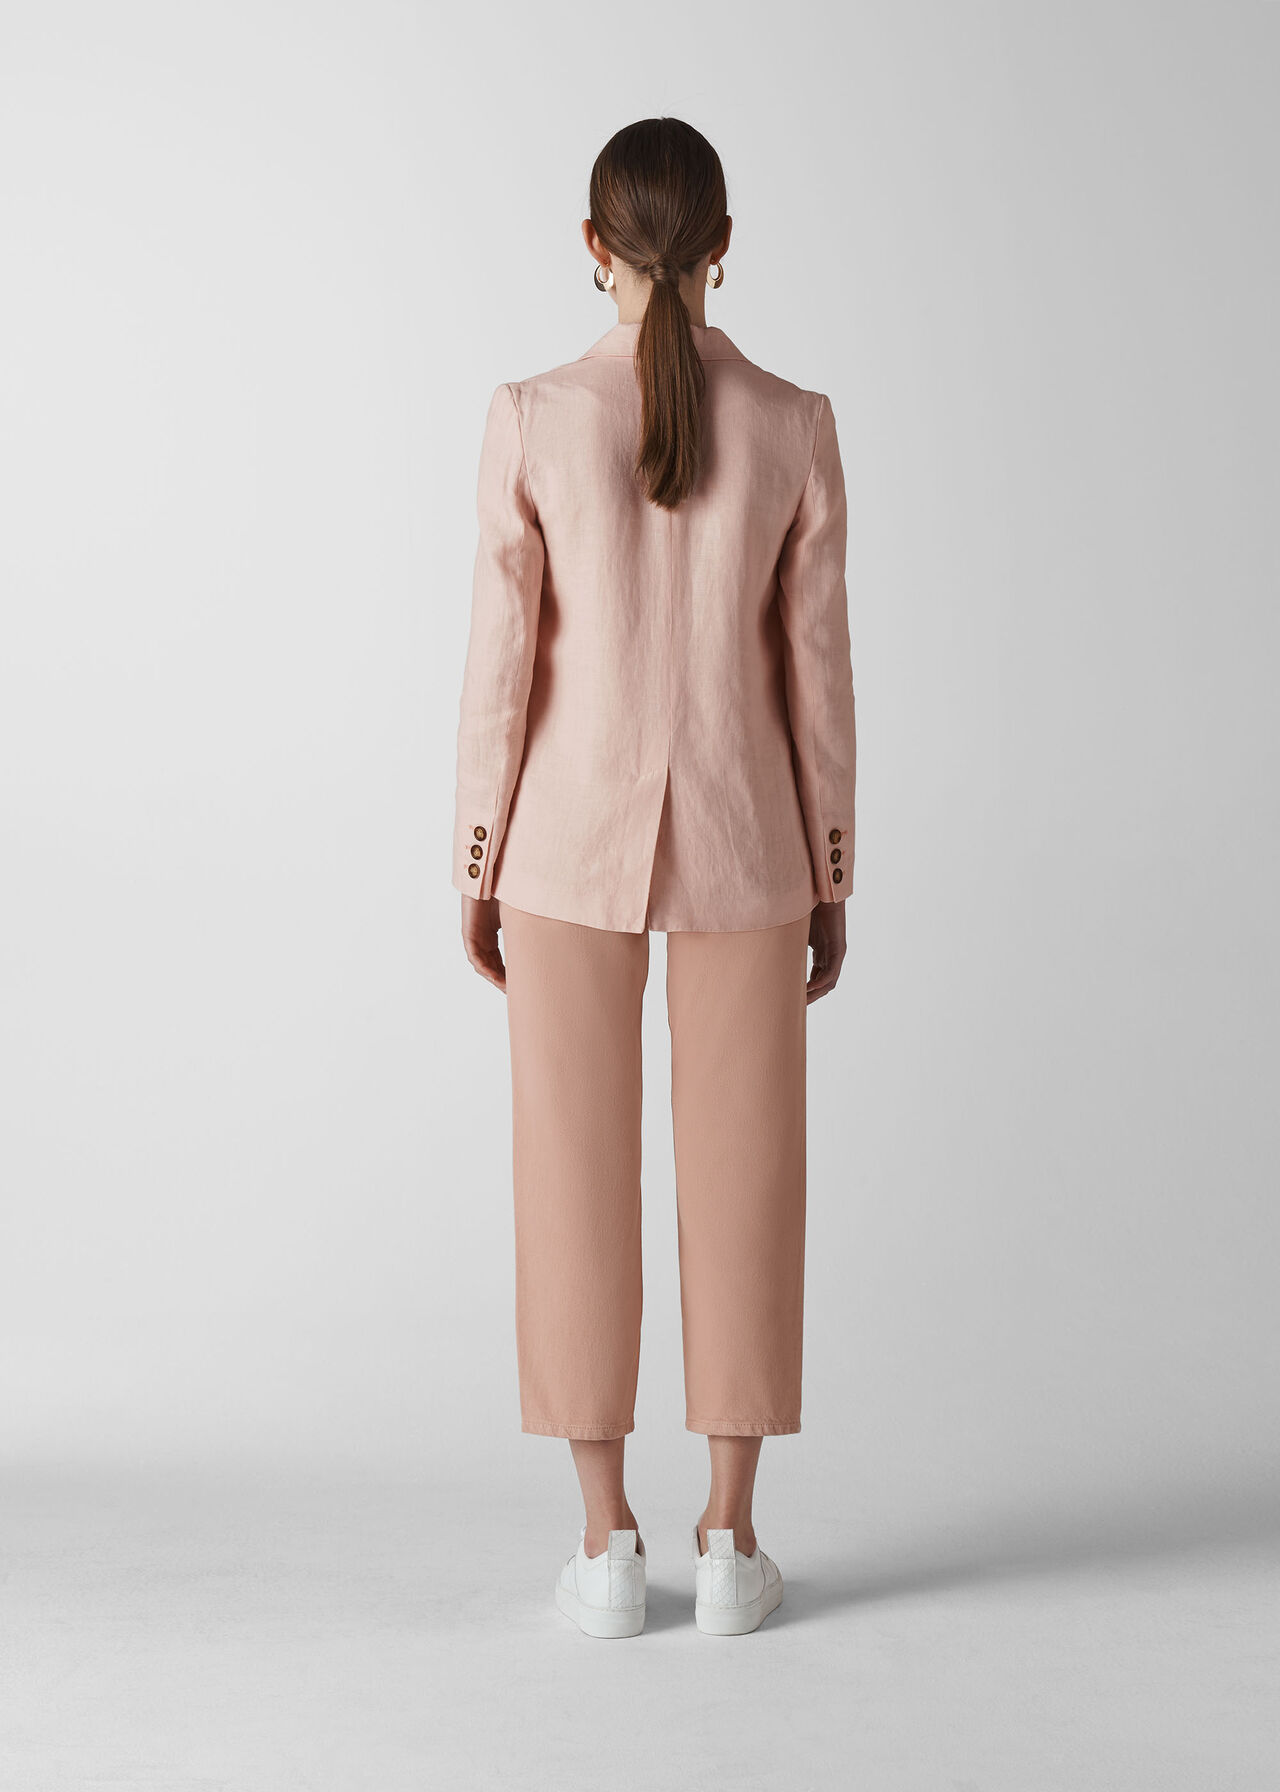 Linen Breasted Blazer Pale Pink